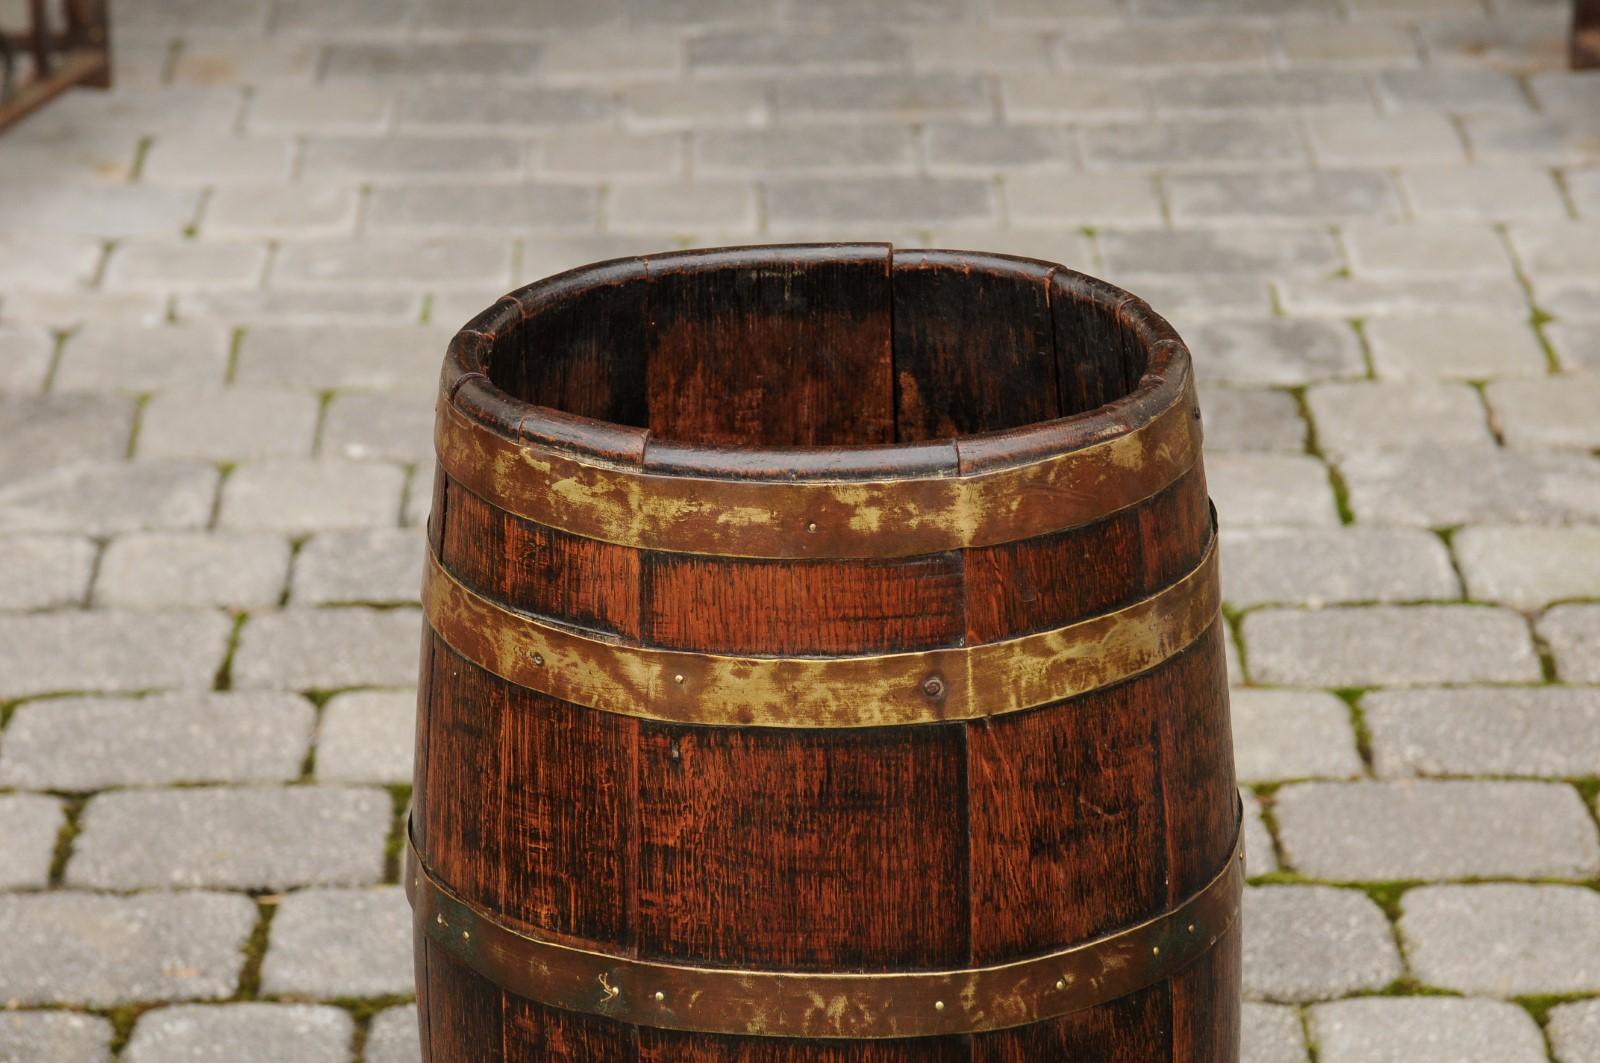 20th Century English Slender Rustic Oak Barrel with Brass Braces from the Turn of the Century